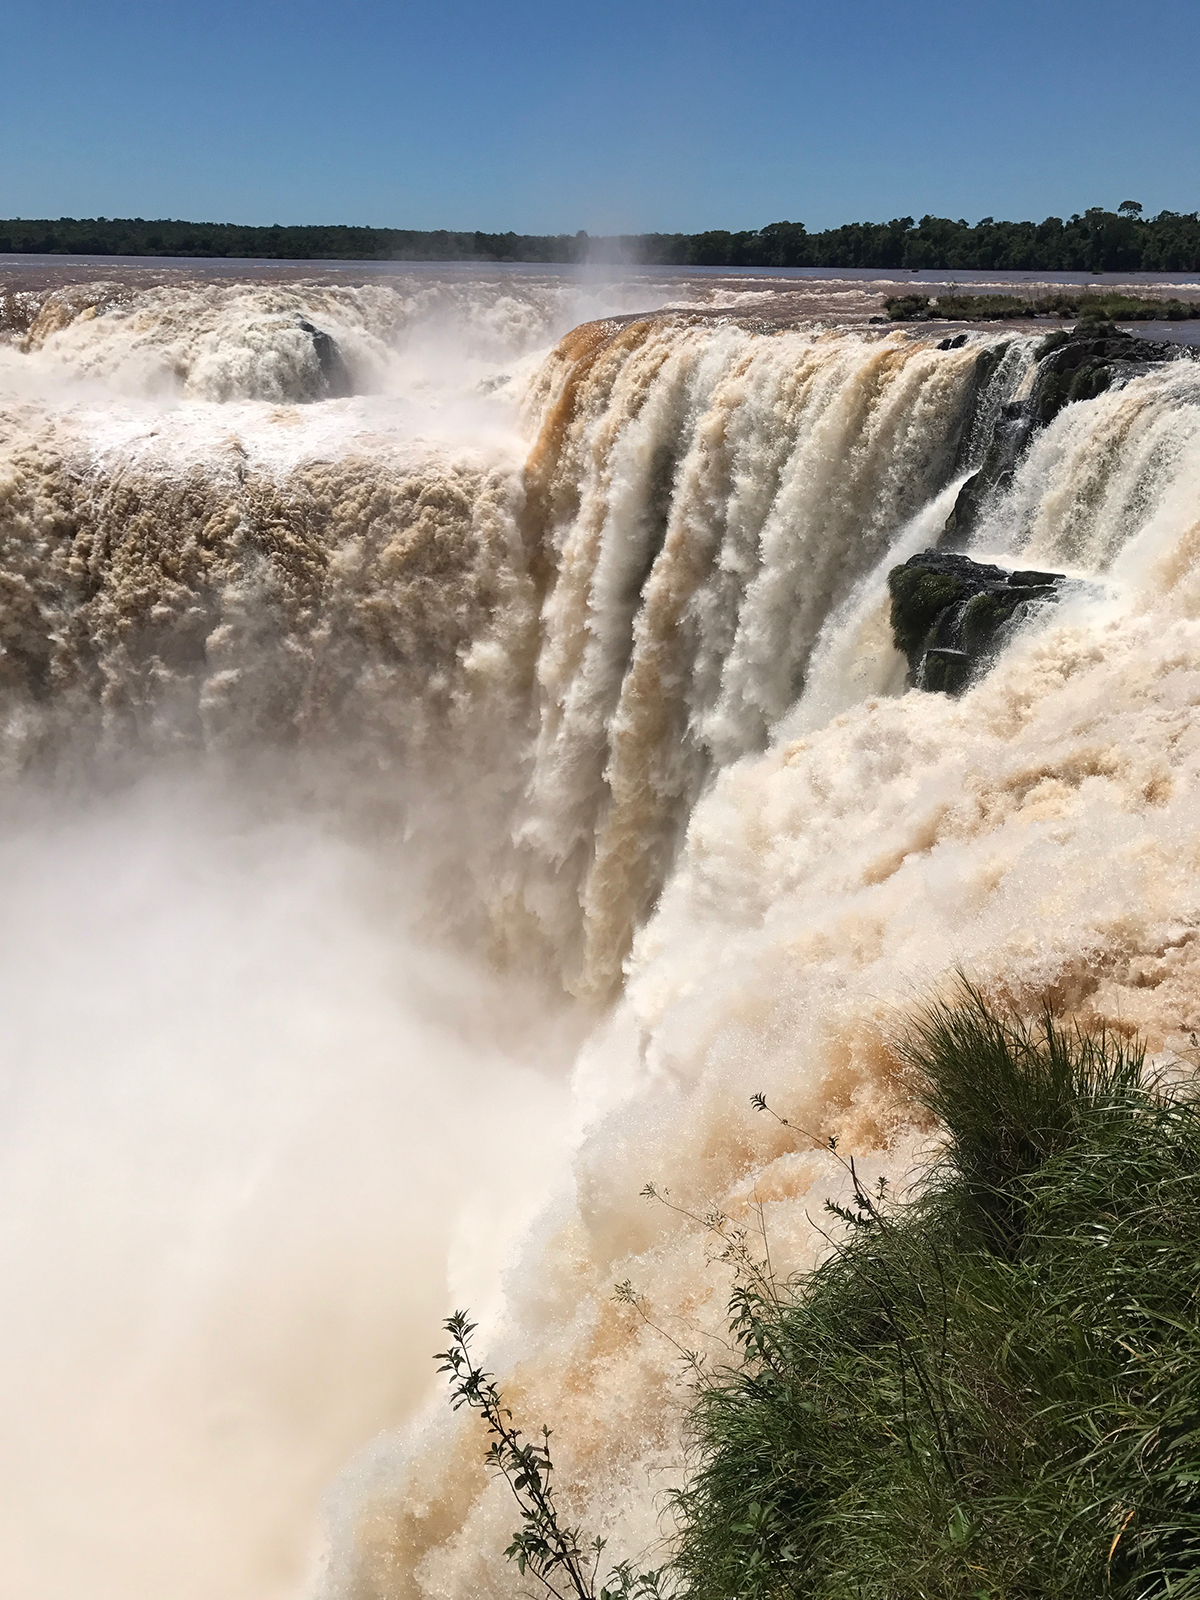 These three photos are all of Iguazú waterfalls from the Argentinian side 2